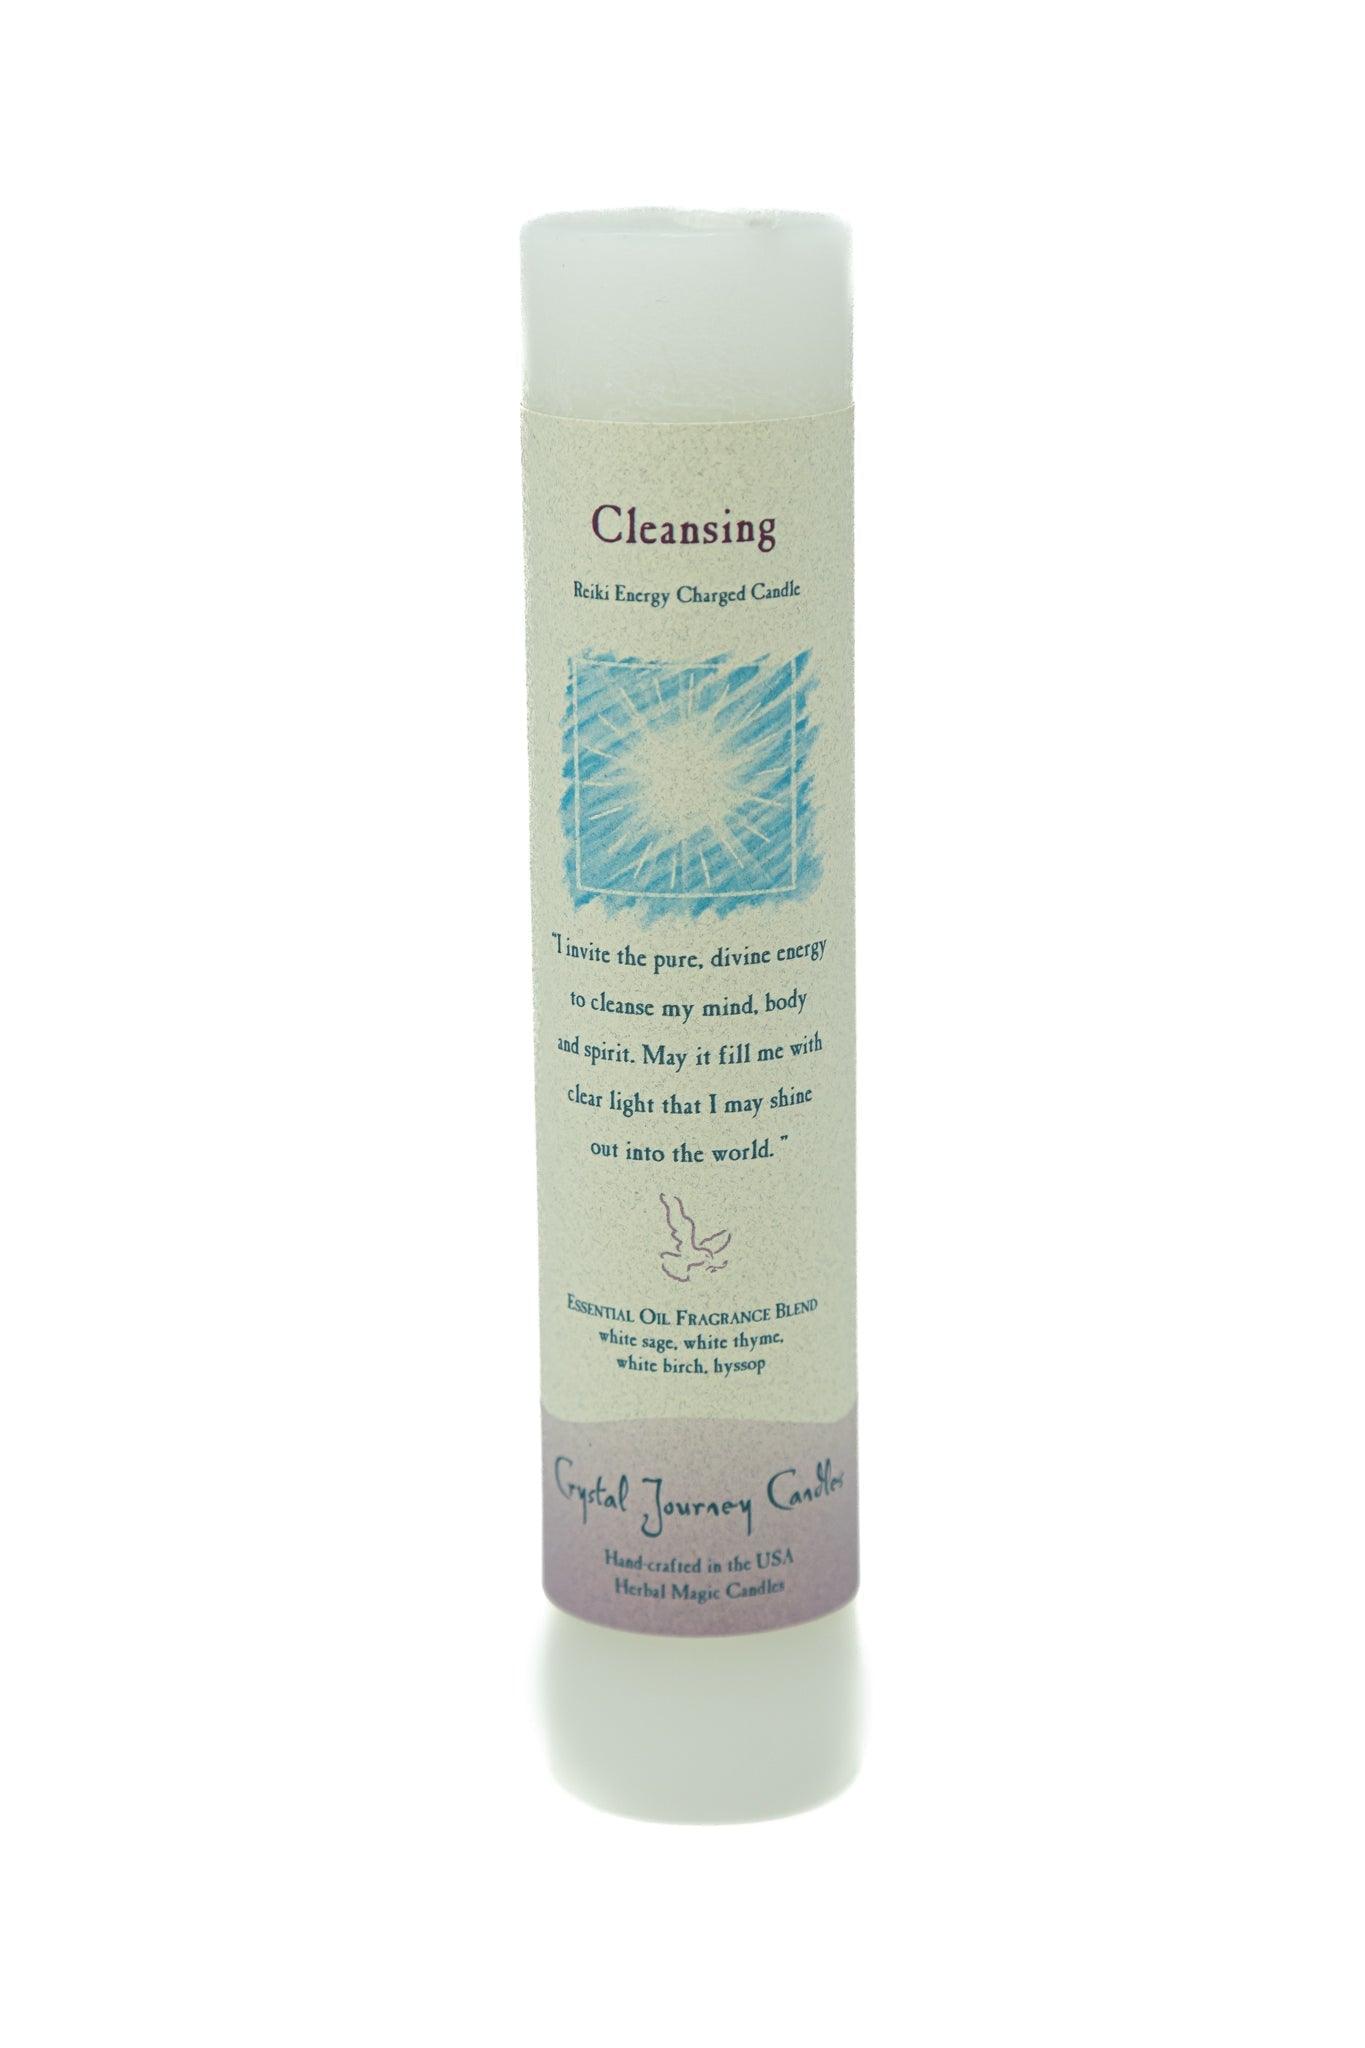 Crystal Journey Candles Cleansing Candles